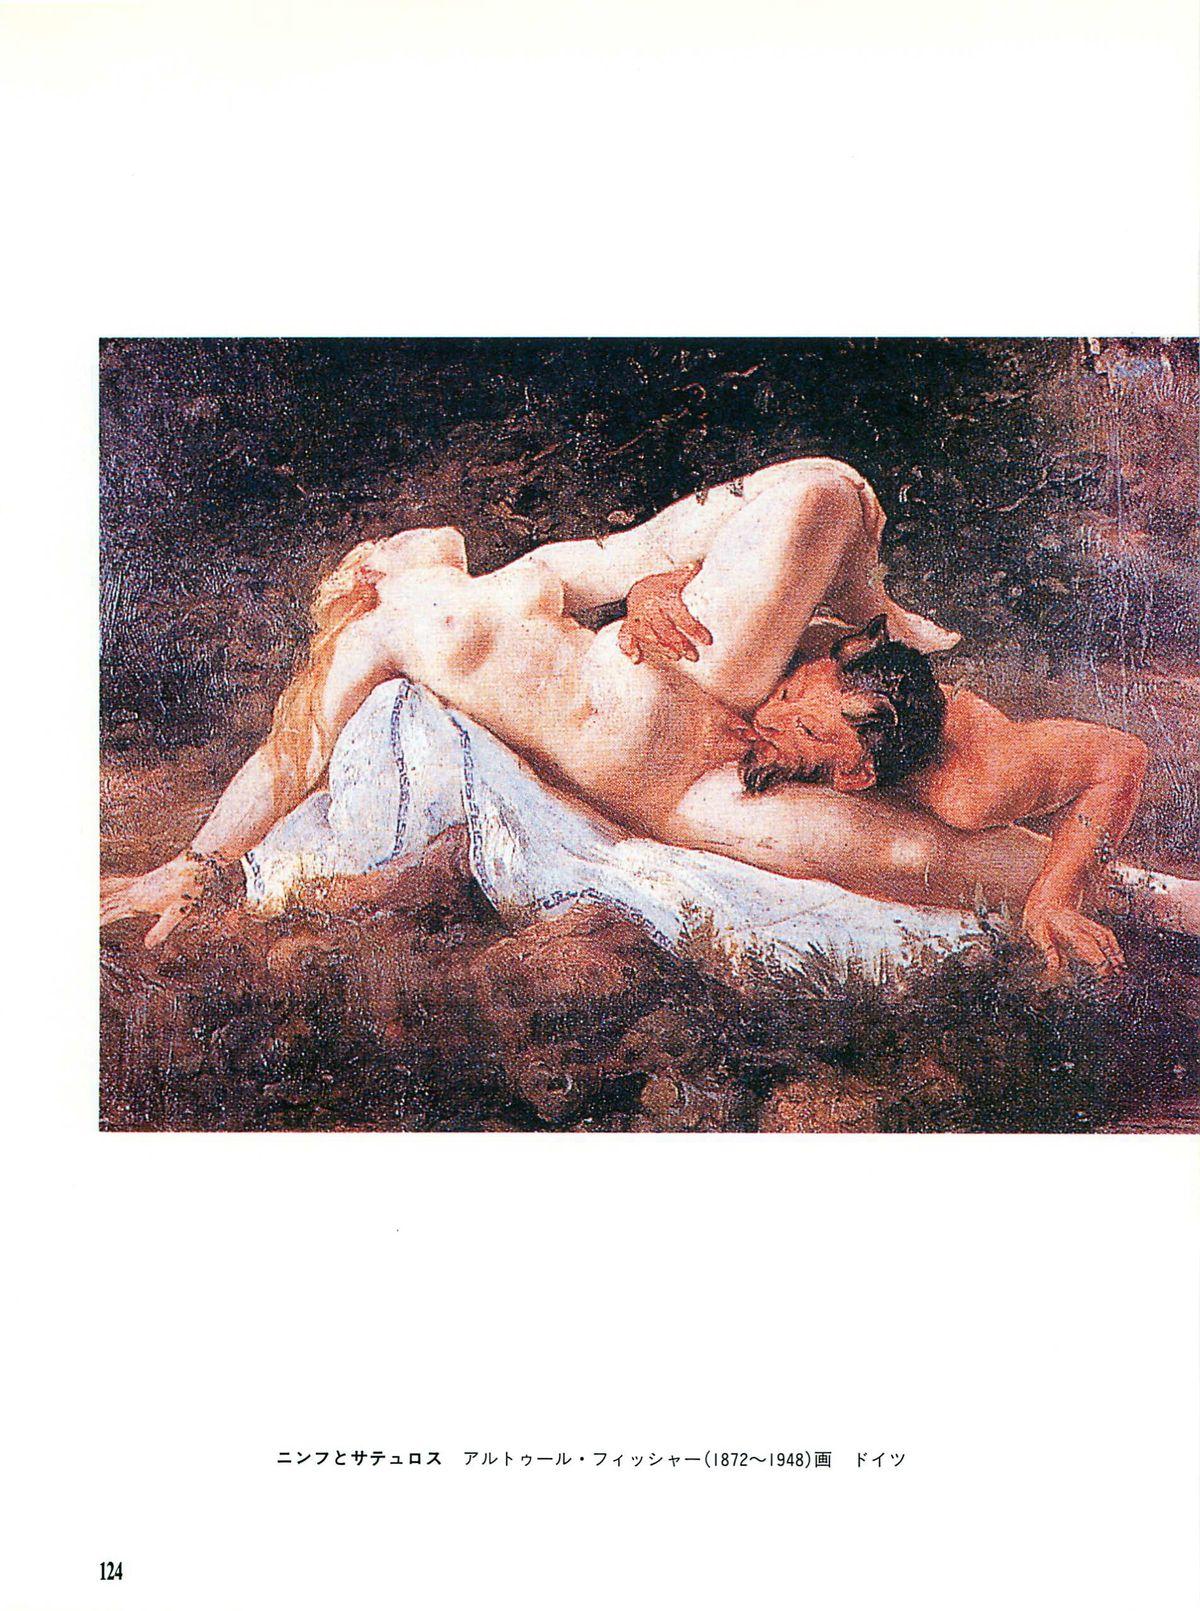 World of Eros: Erotic pieces of the masters 128